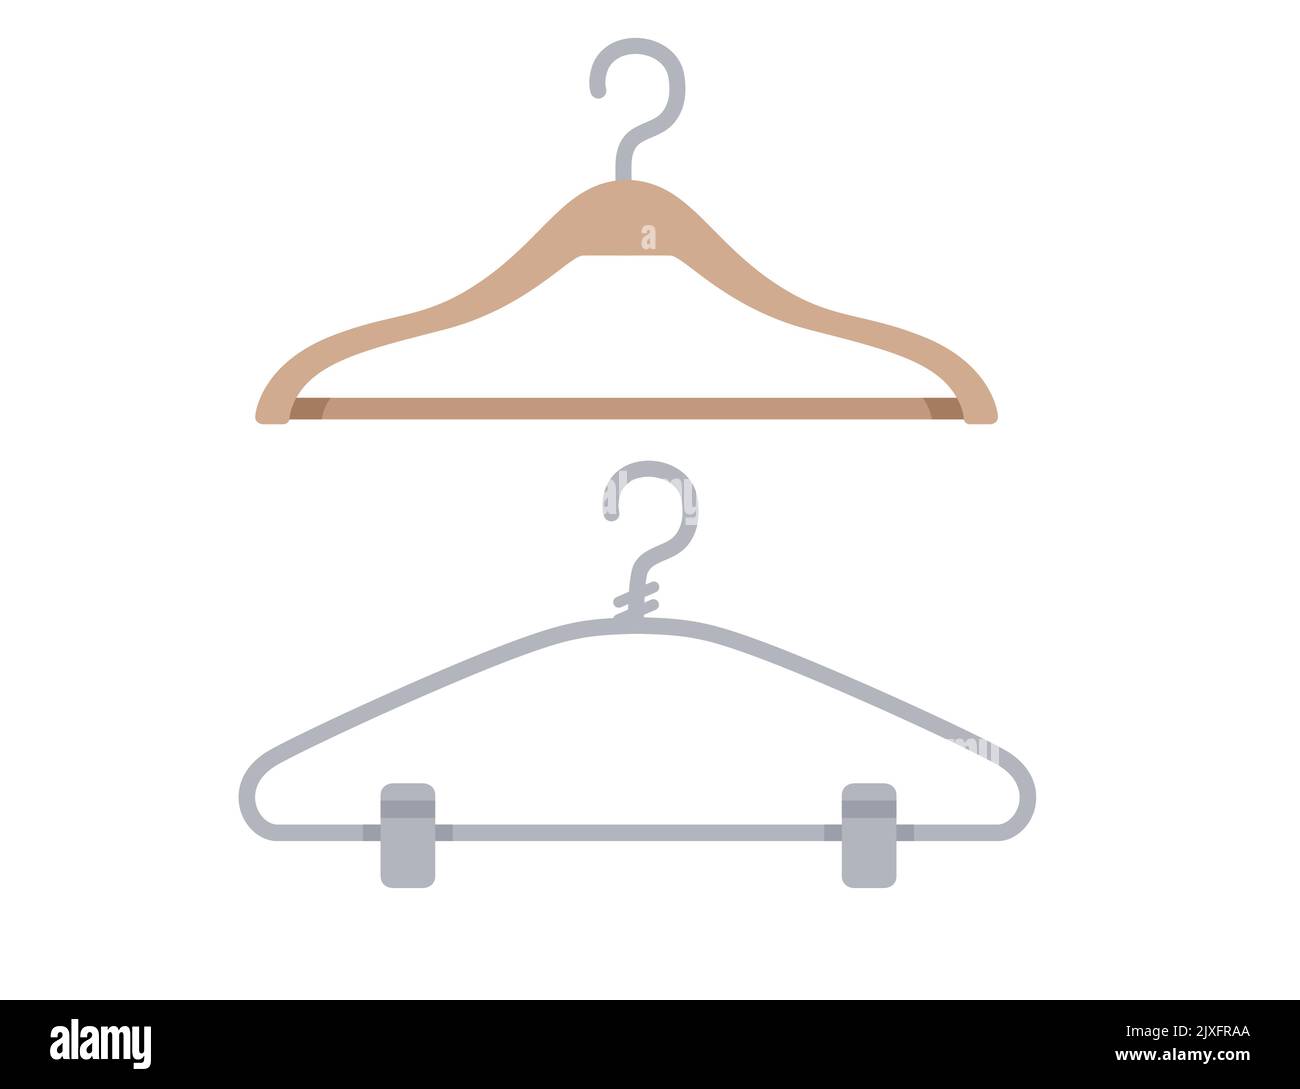 Wooden and metal clothes coat hanger vector illustration isolated on white background Stock Vector